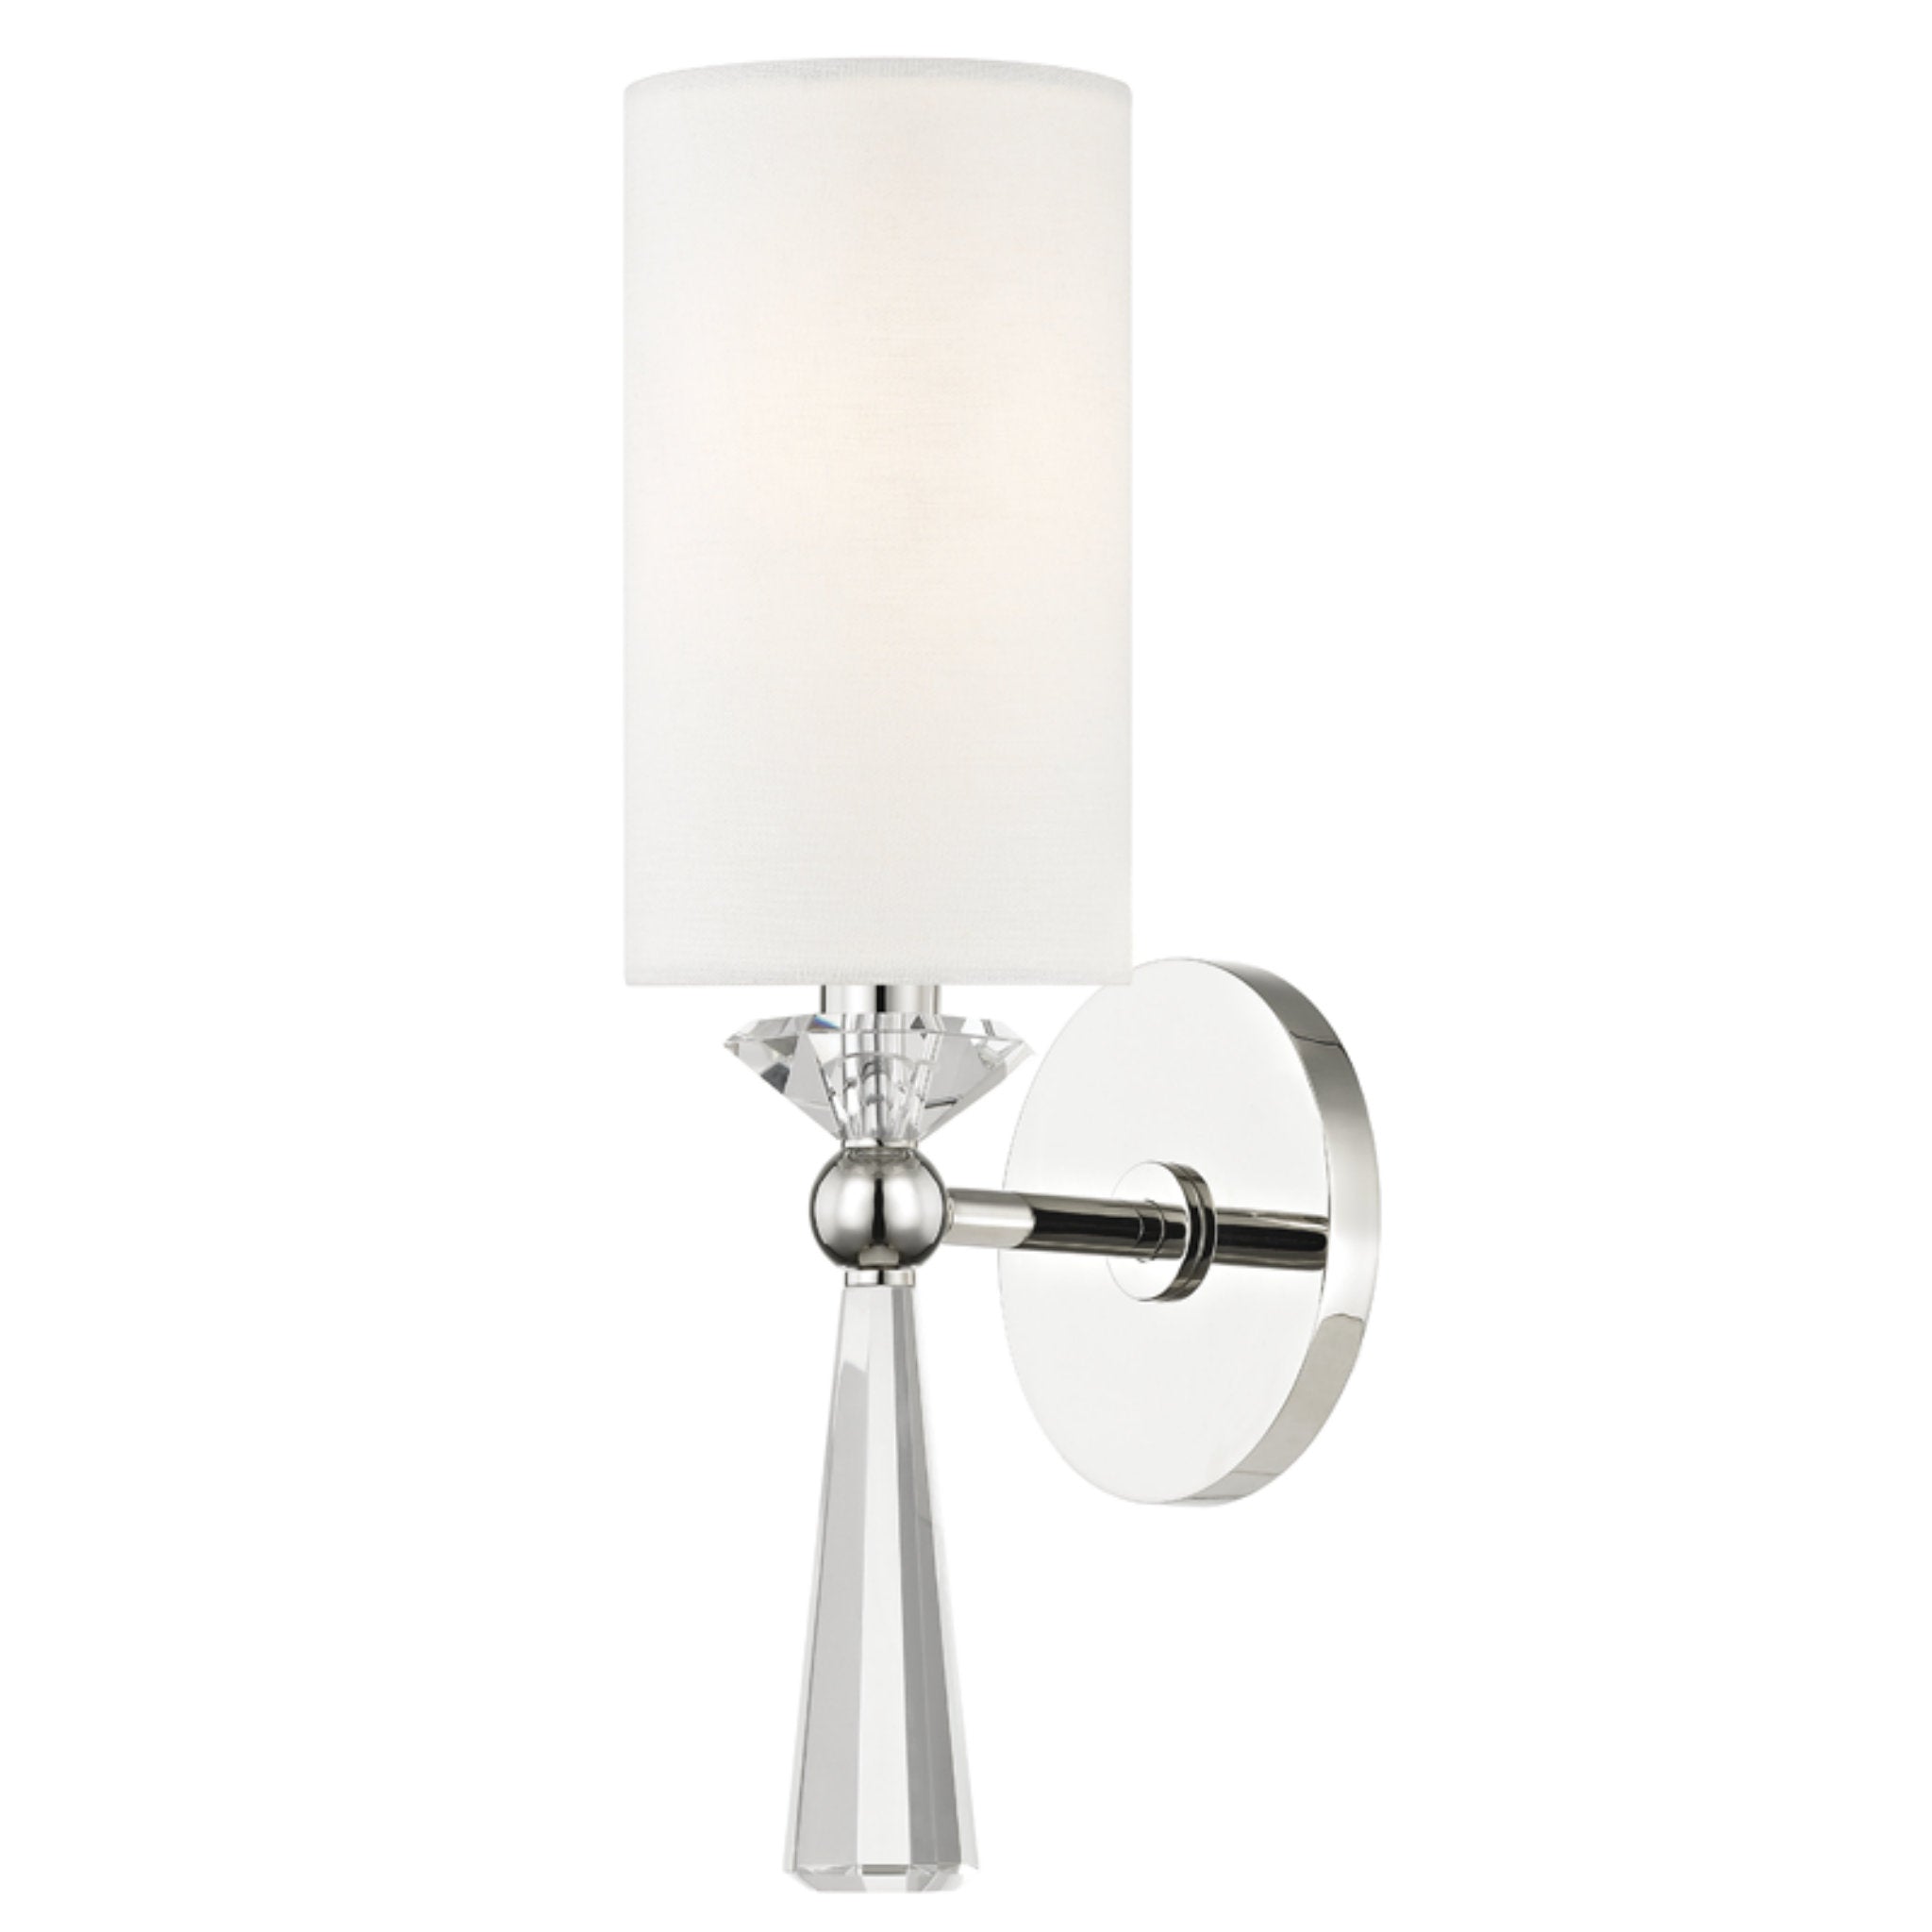 Birch 1 Light Wall Sconce in Polished Nickel